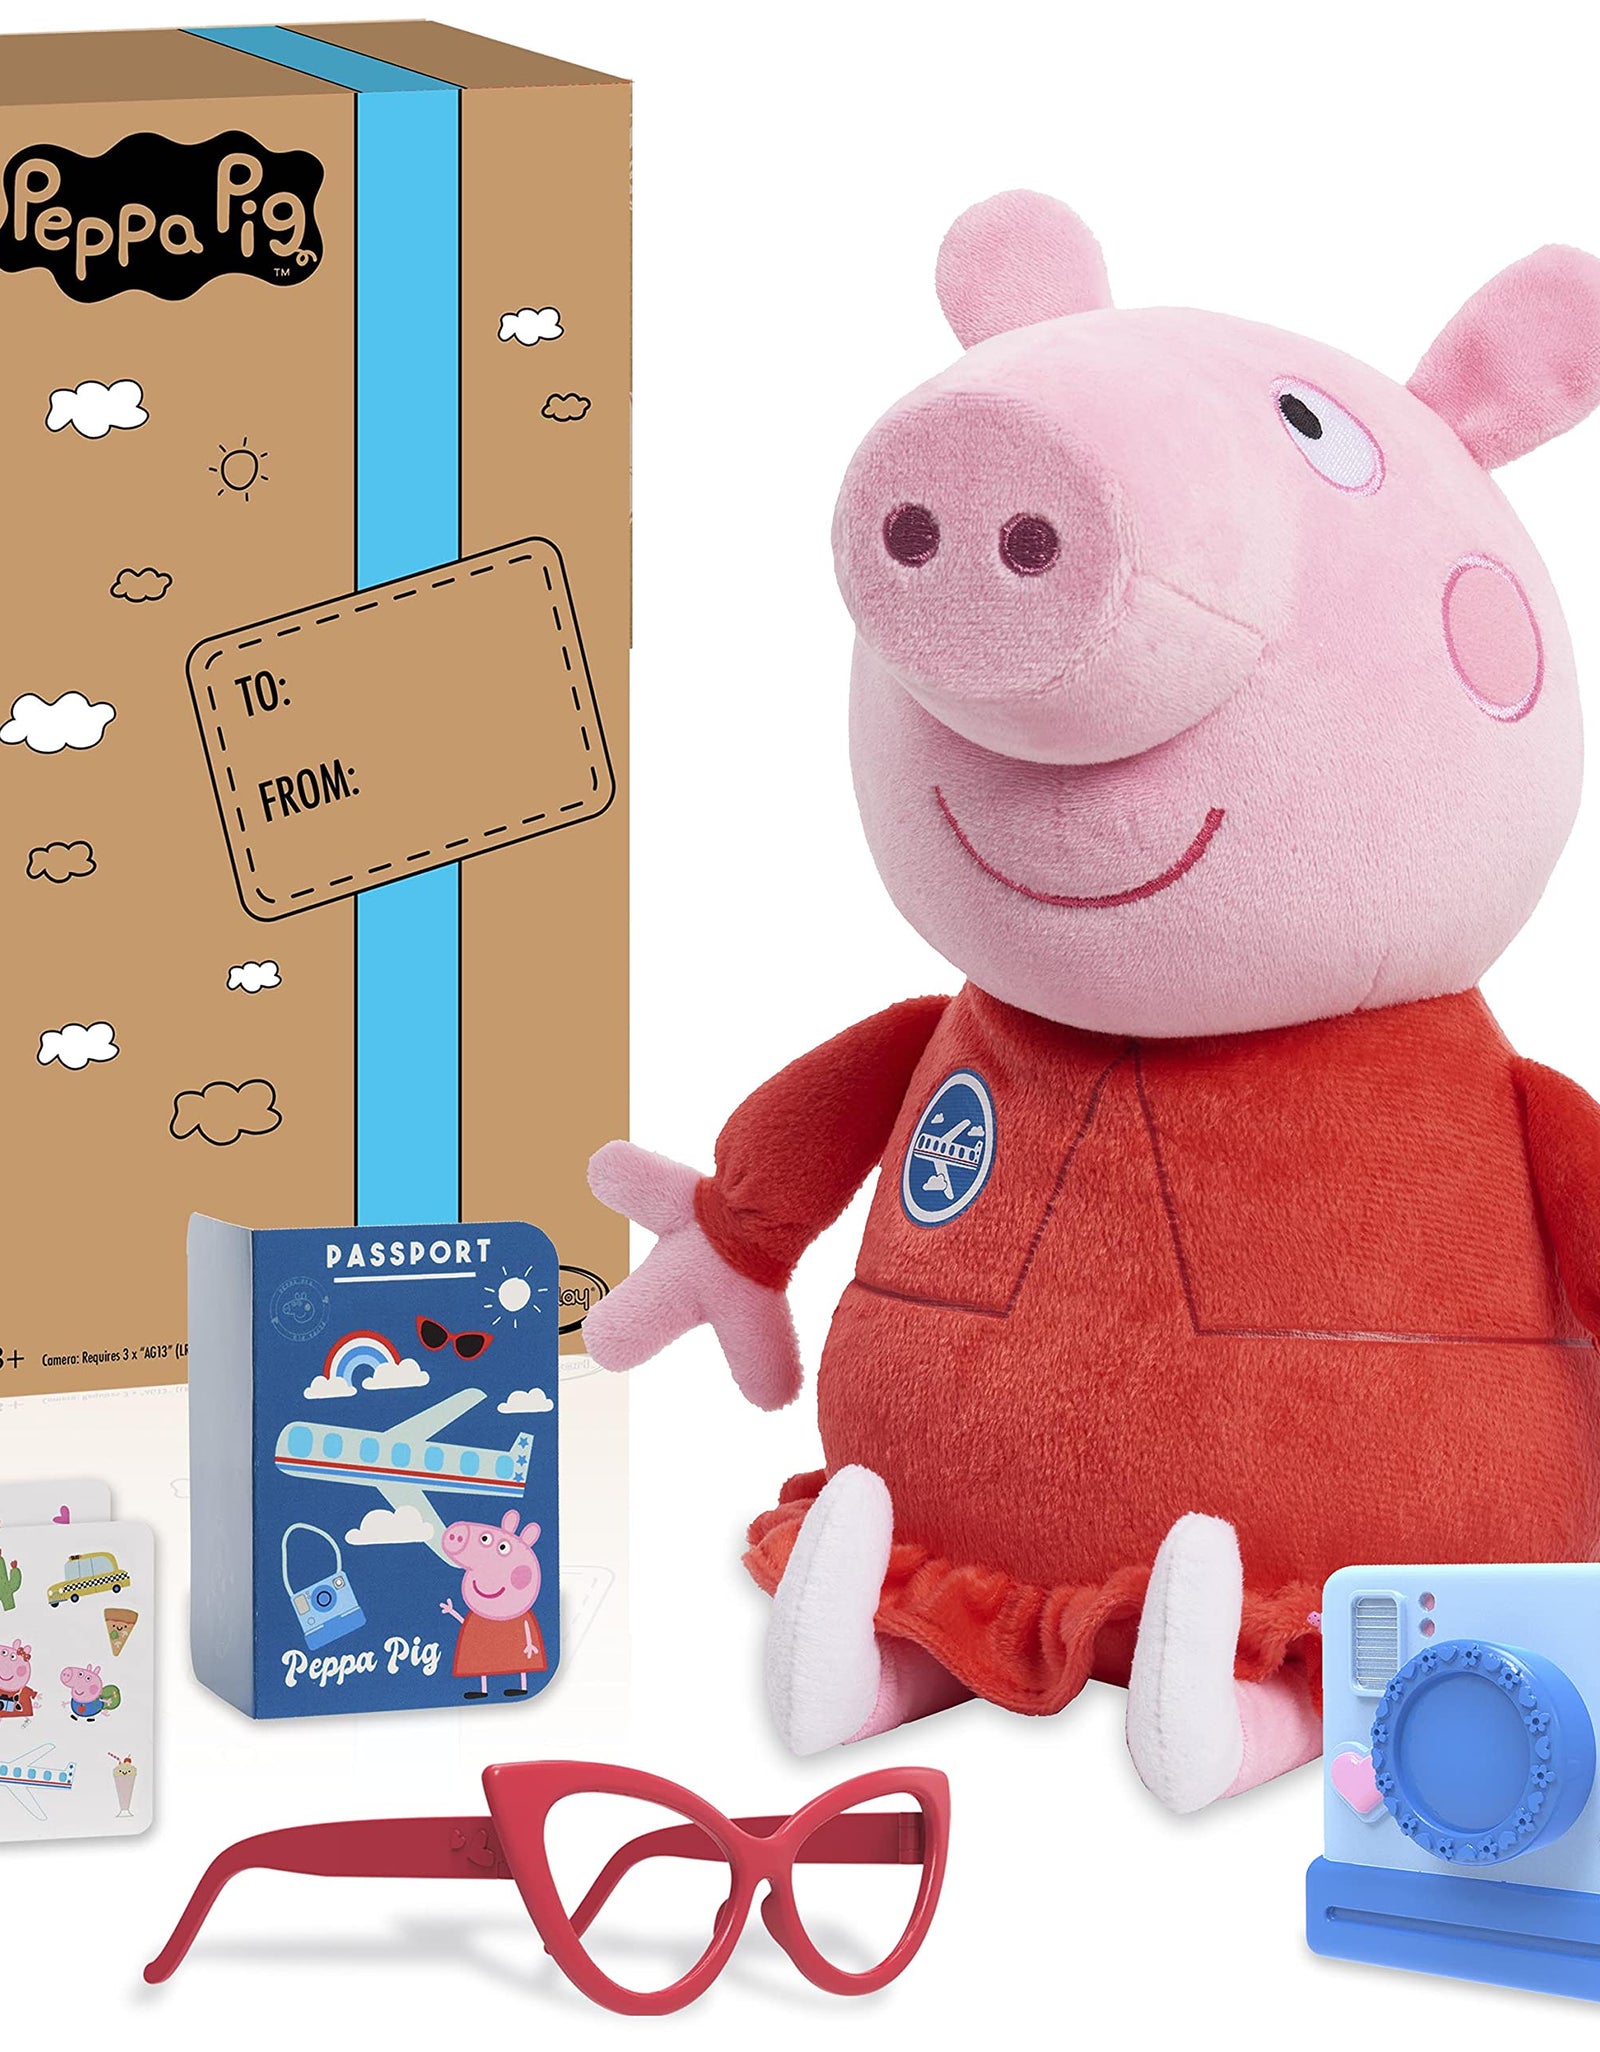 Peppa Pig 13.5-Inch Tourist Peppa Pig Plush, Super Soft & Cuddly Stuffed Animal, Amazon Exclusive, by Just Play